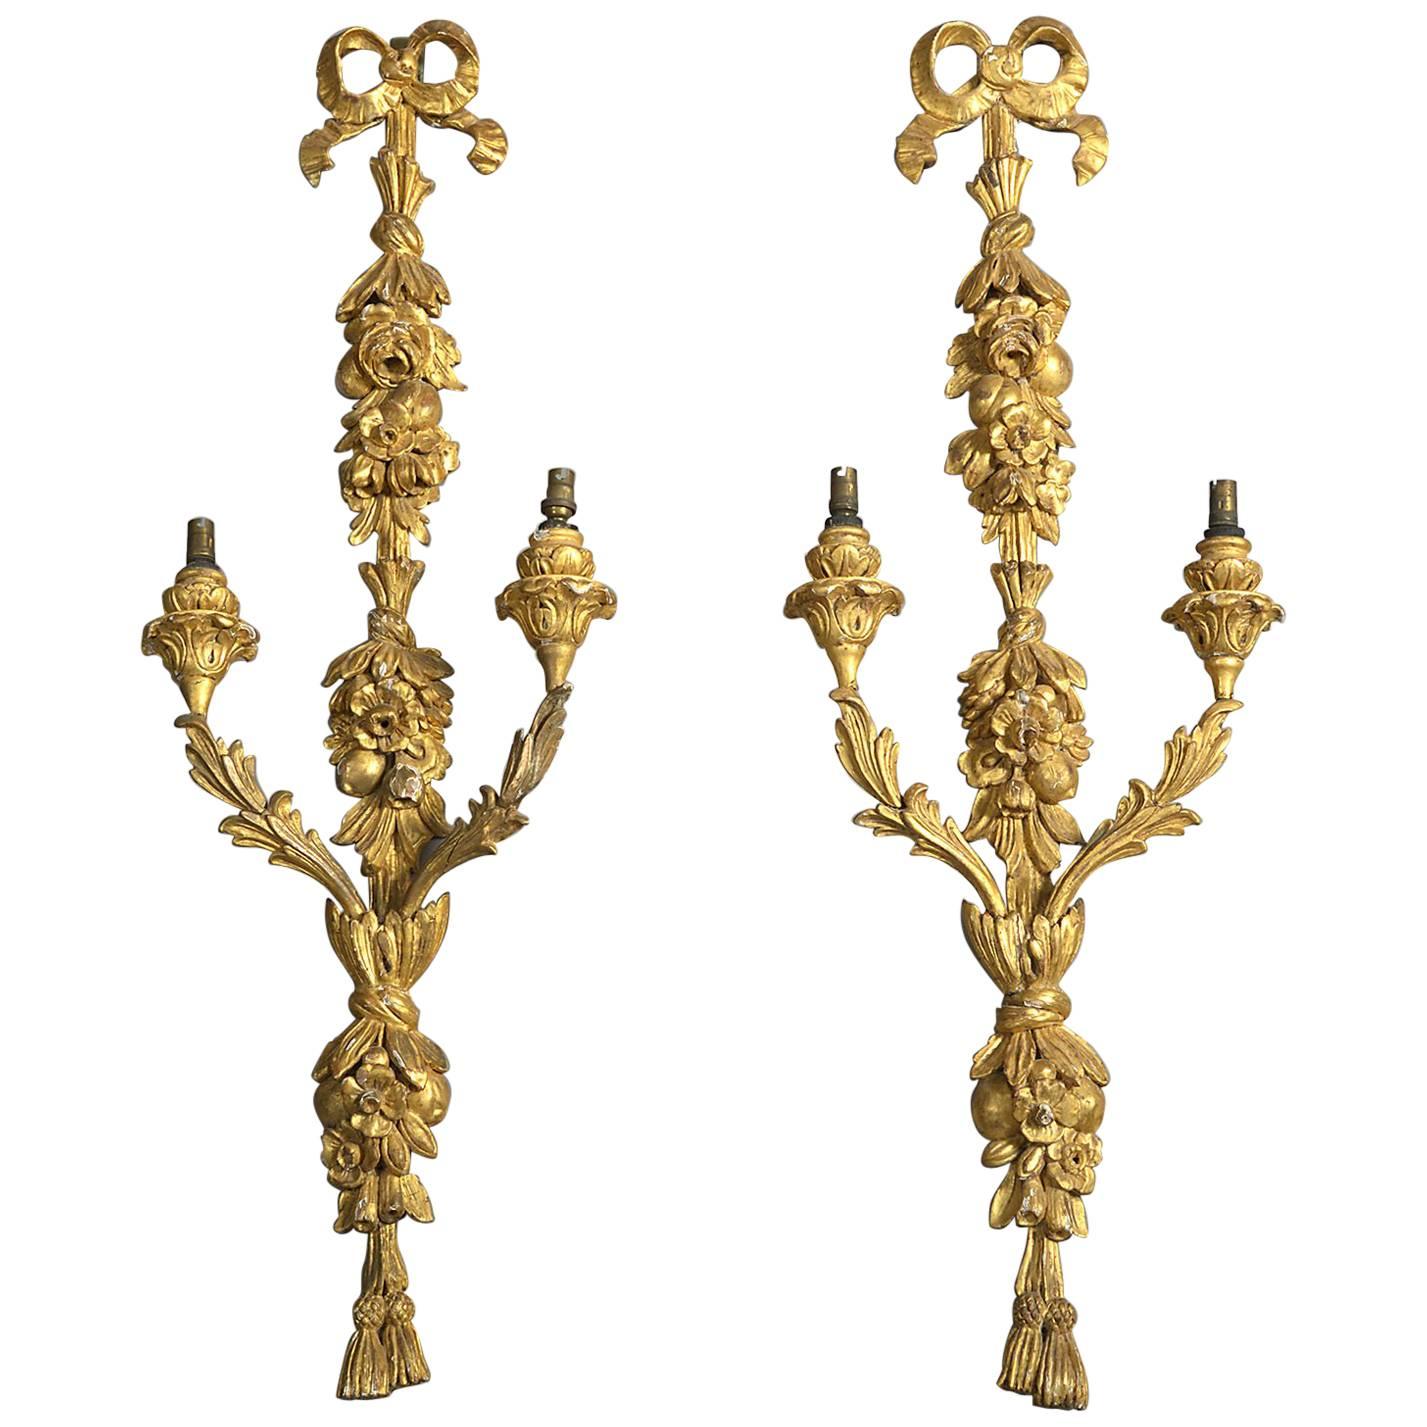 Pair of George III Giltwood Wall-Lights or Sconces For Sale